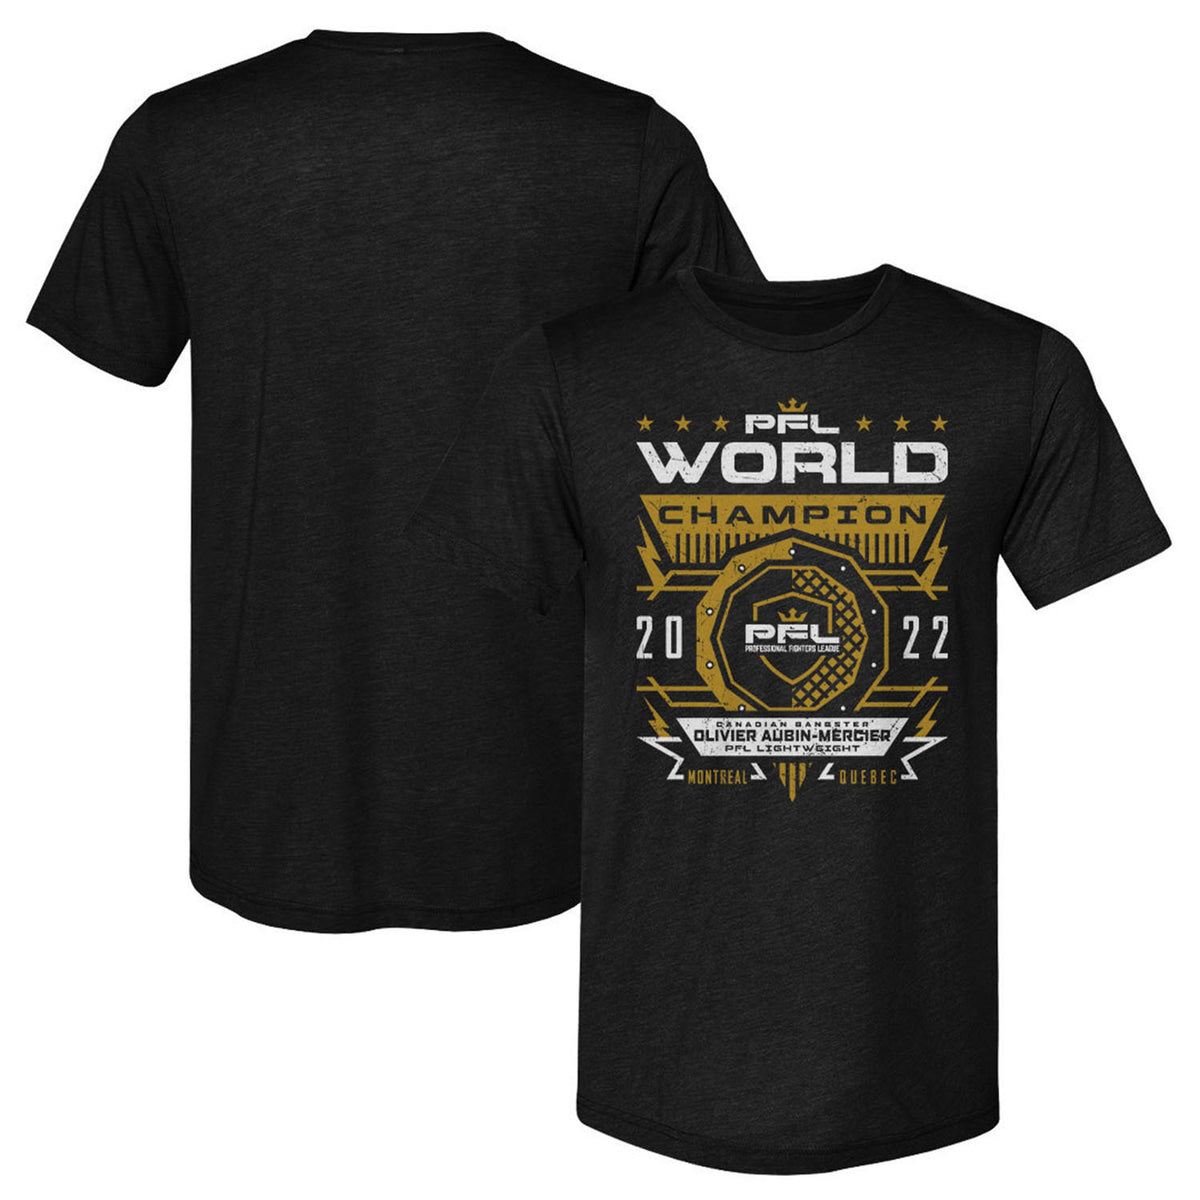 Olivier Aubin-Mercier Champion T-Shirt in Black - Front and Back View